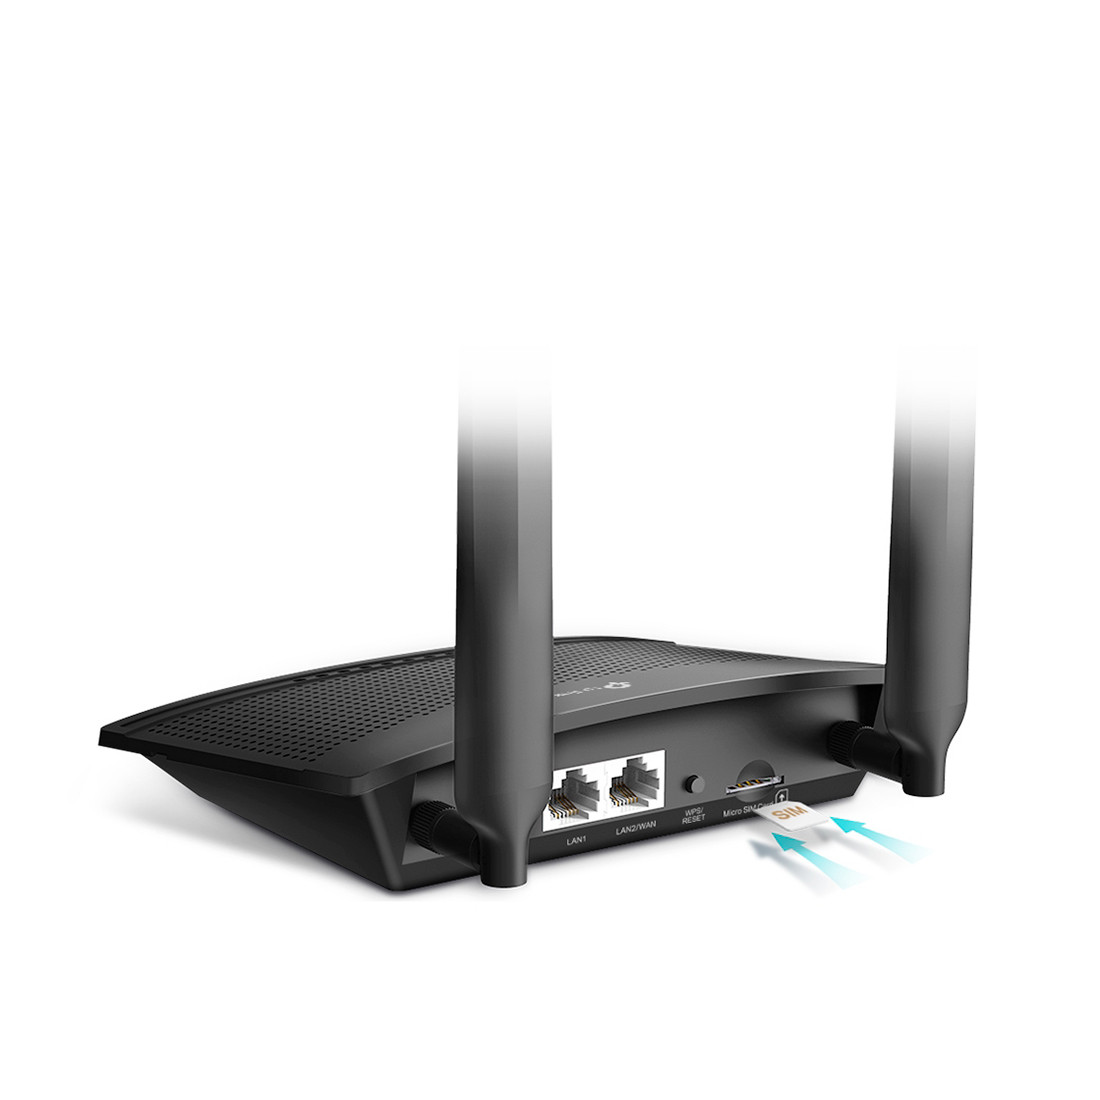 TP-Link TL-MR100 2-006316 маршрутизаторы - фото 3 - id-p107241407